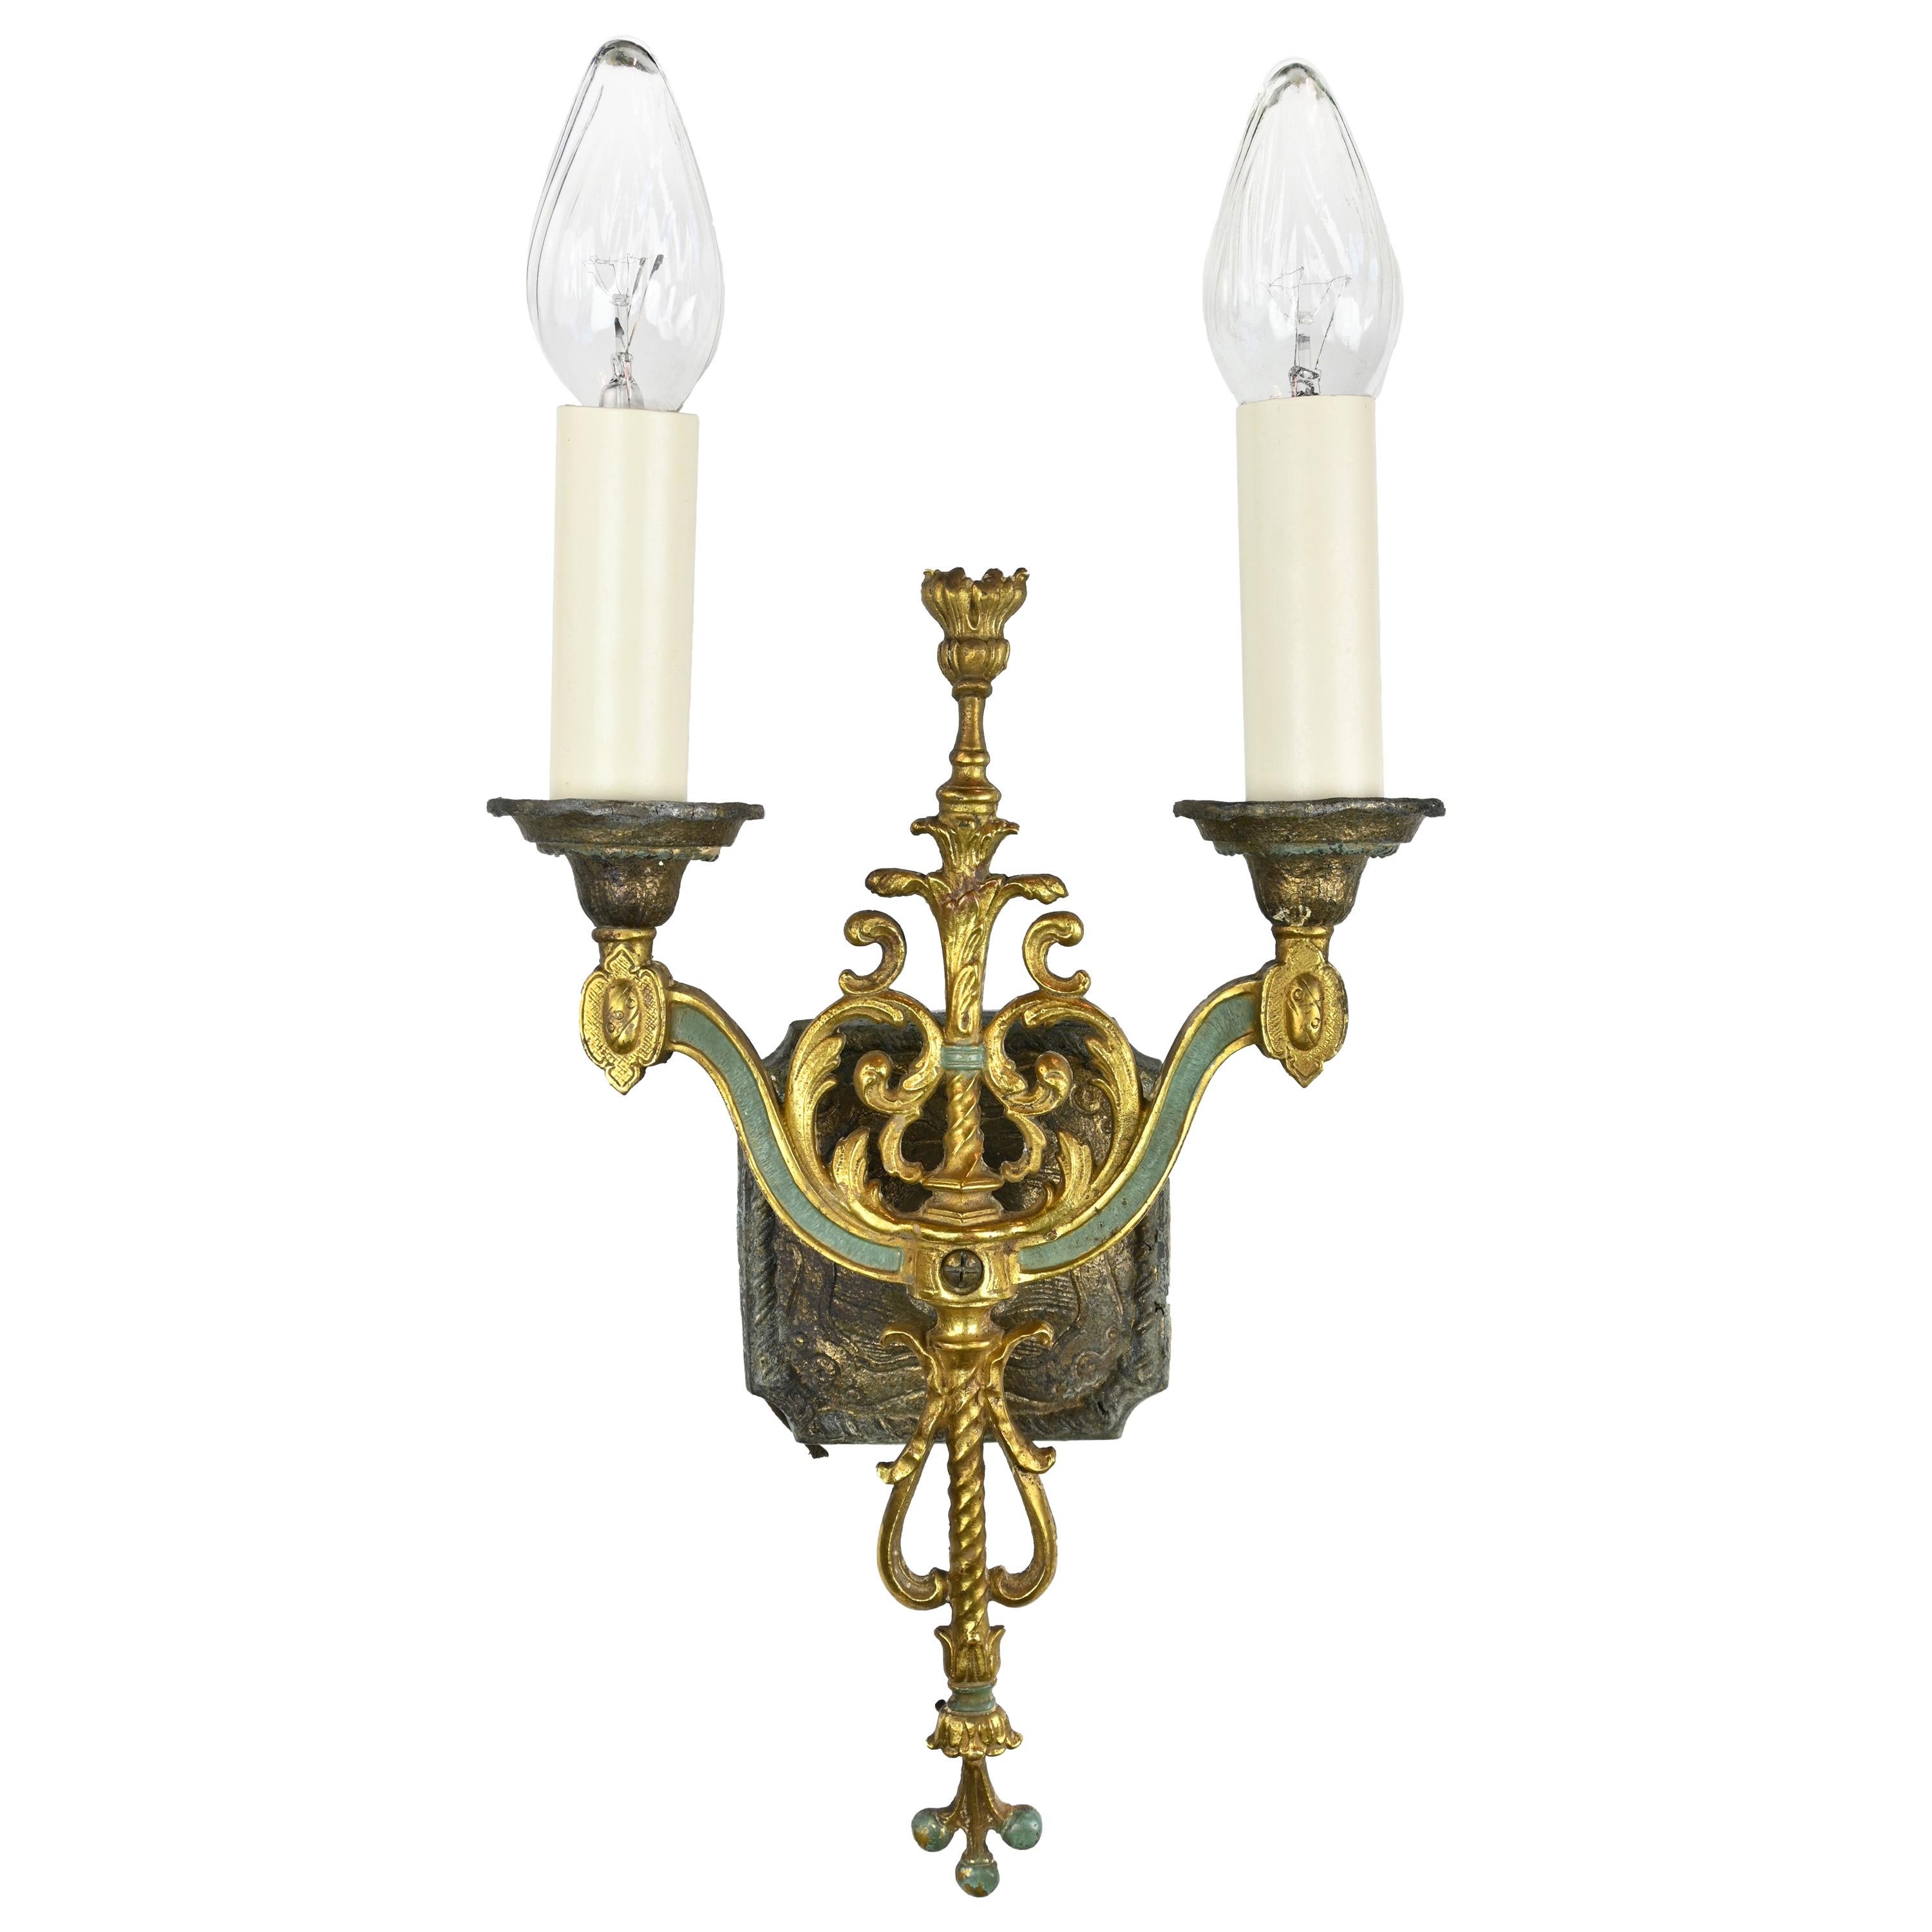 Gold and Teal Two Candle Brass Sconce